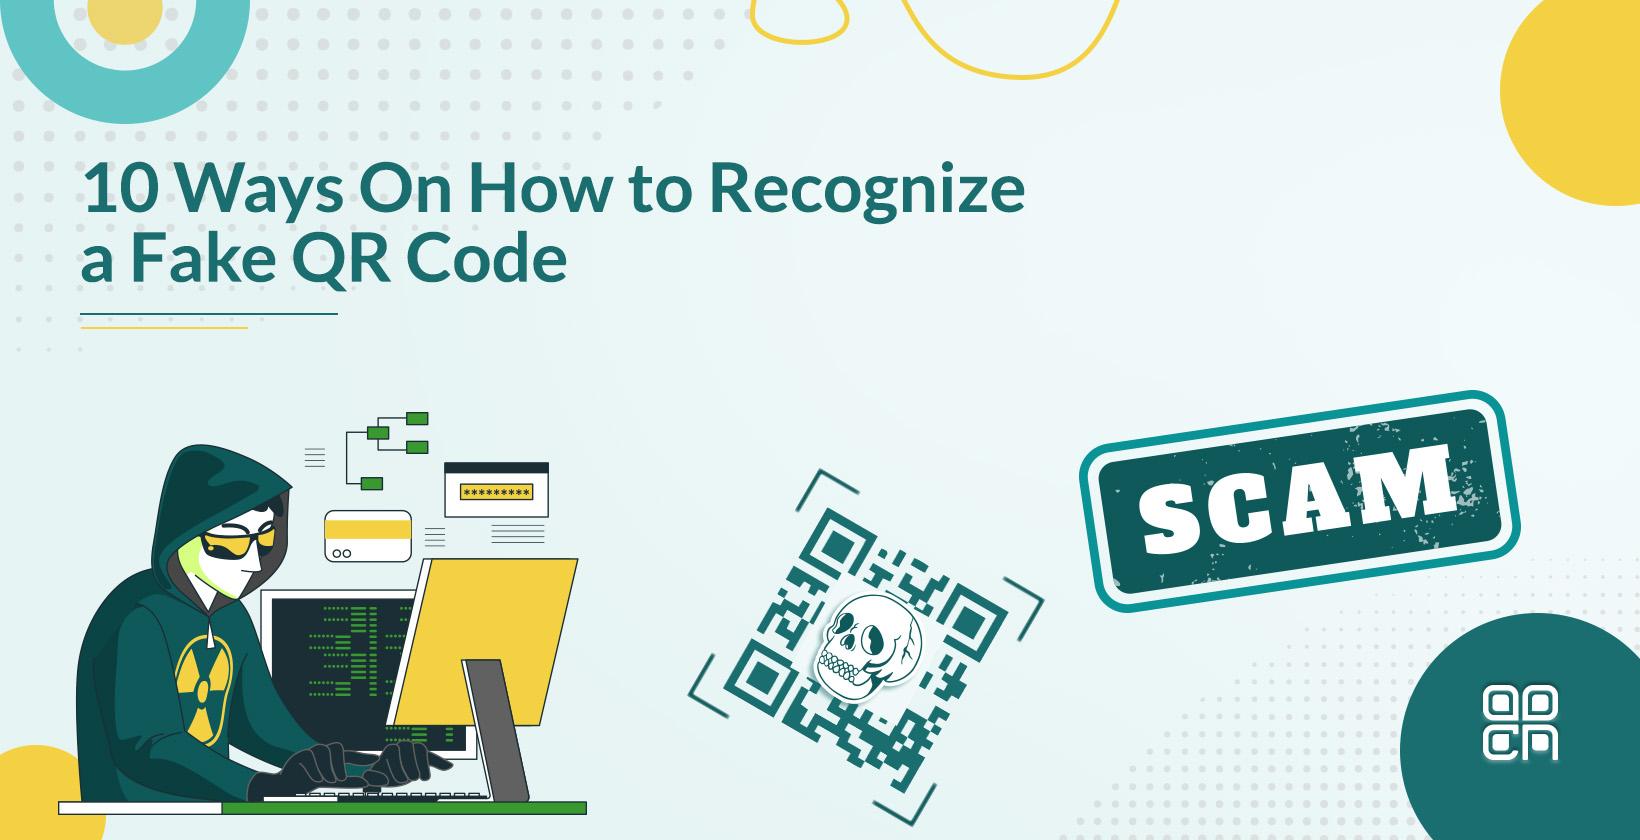 How to Recognize a Fake QR Code